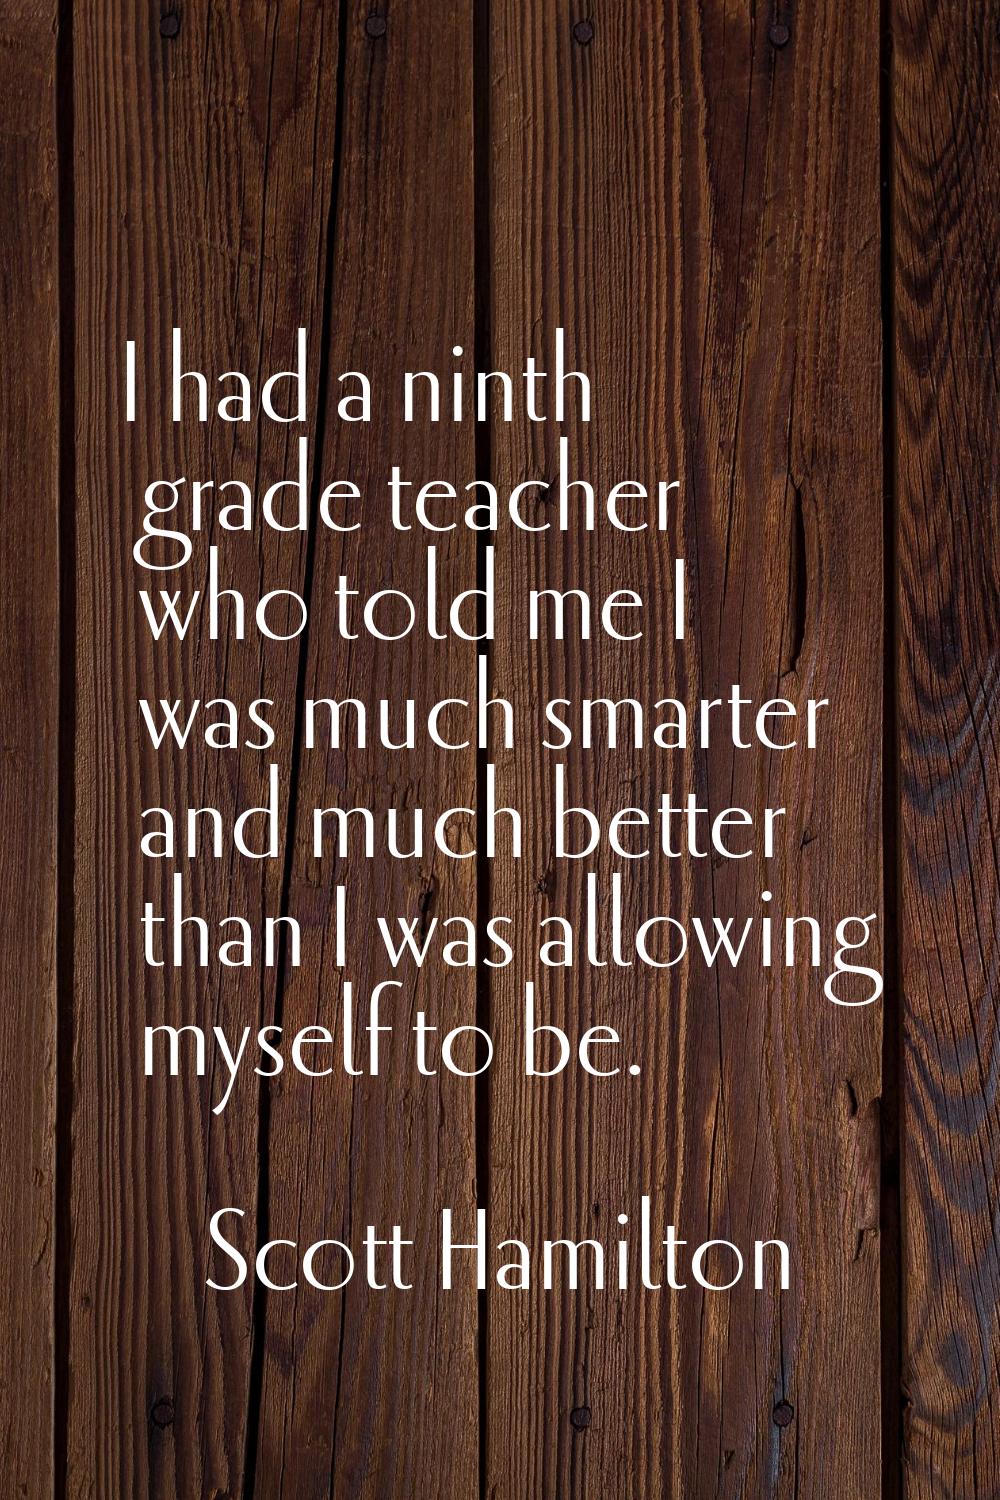 I had a ninth grade teacher who told me I was much smarter and much better than I was allowing myse